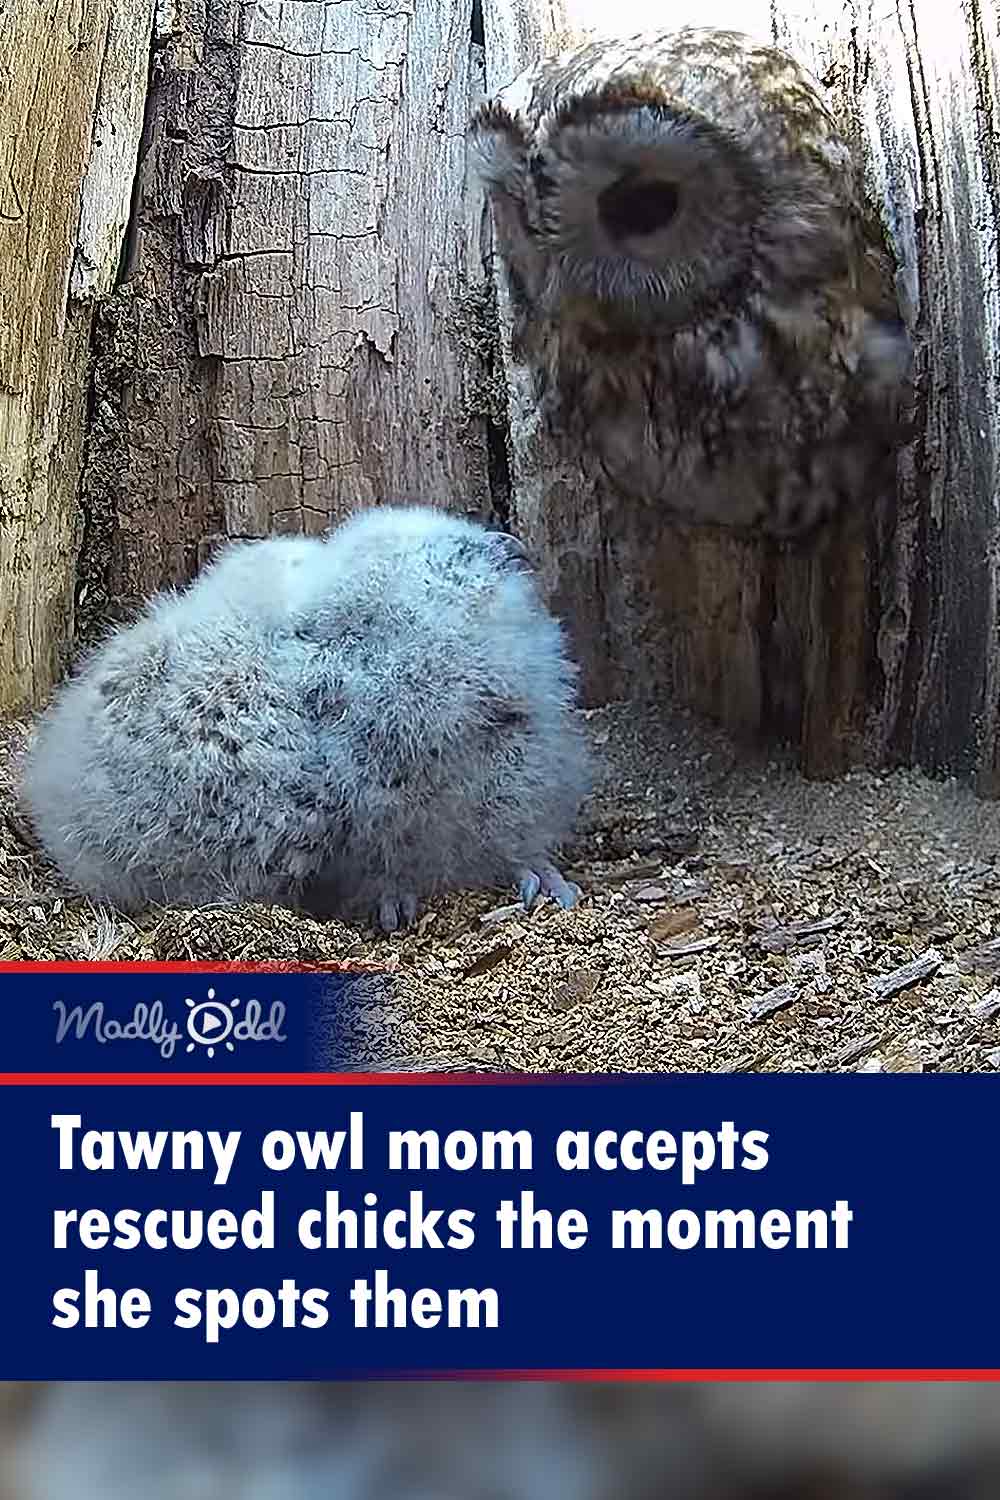 Tawny owl mom accepts rescued chicks the moment she spots them